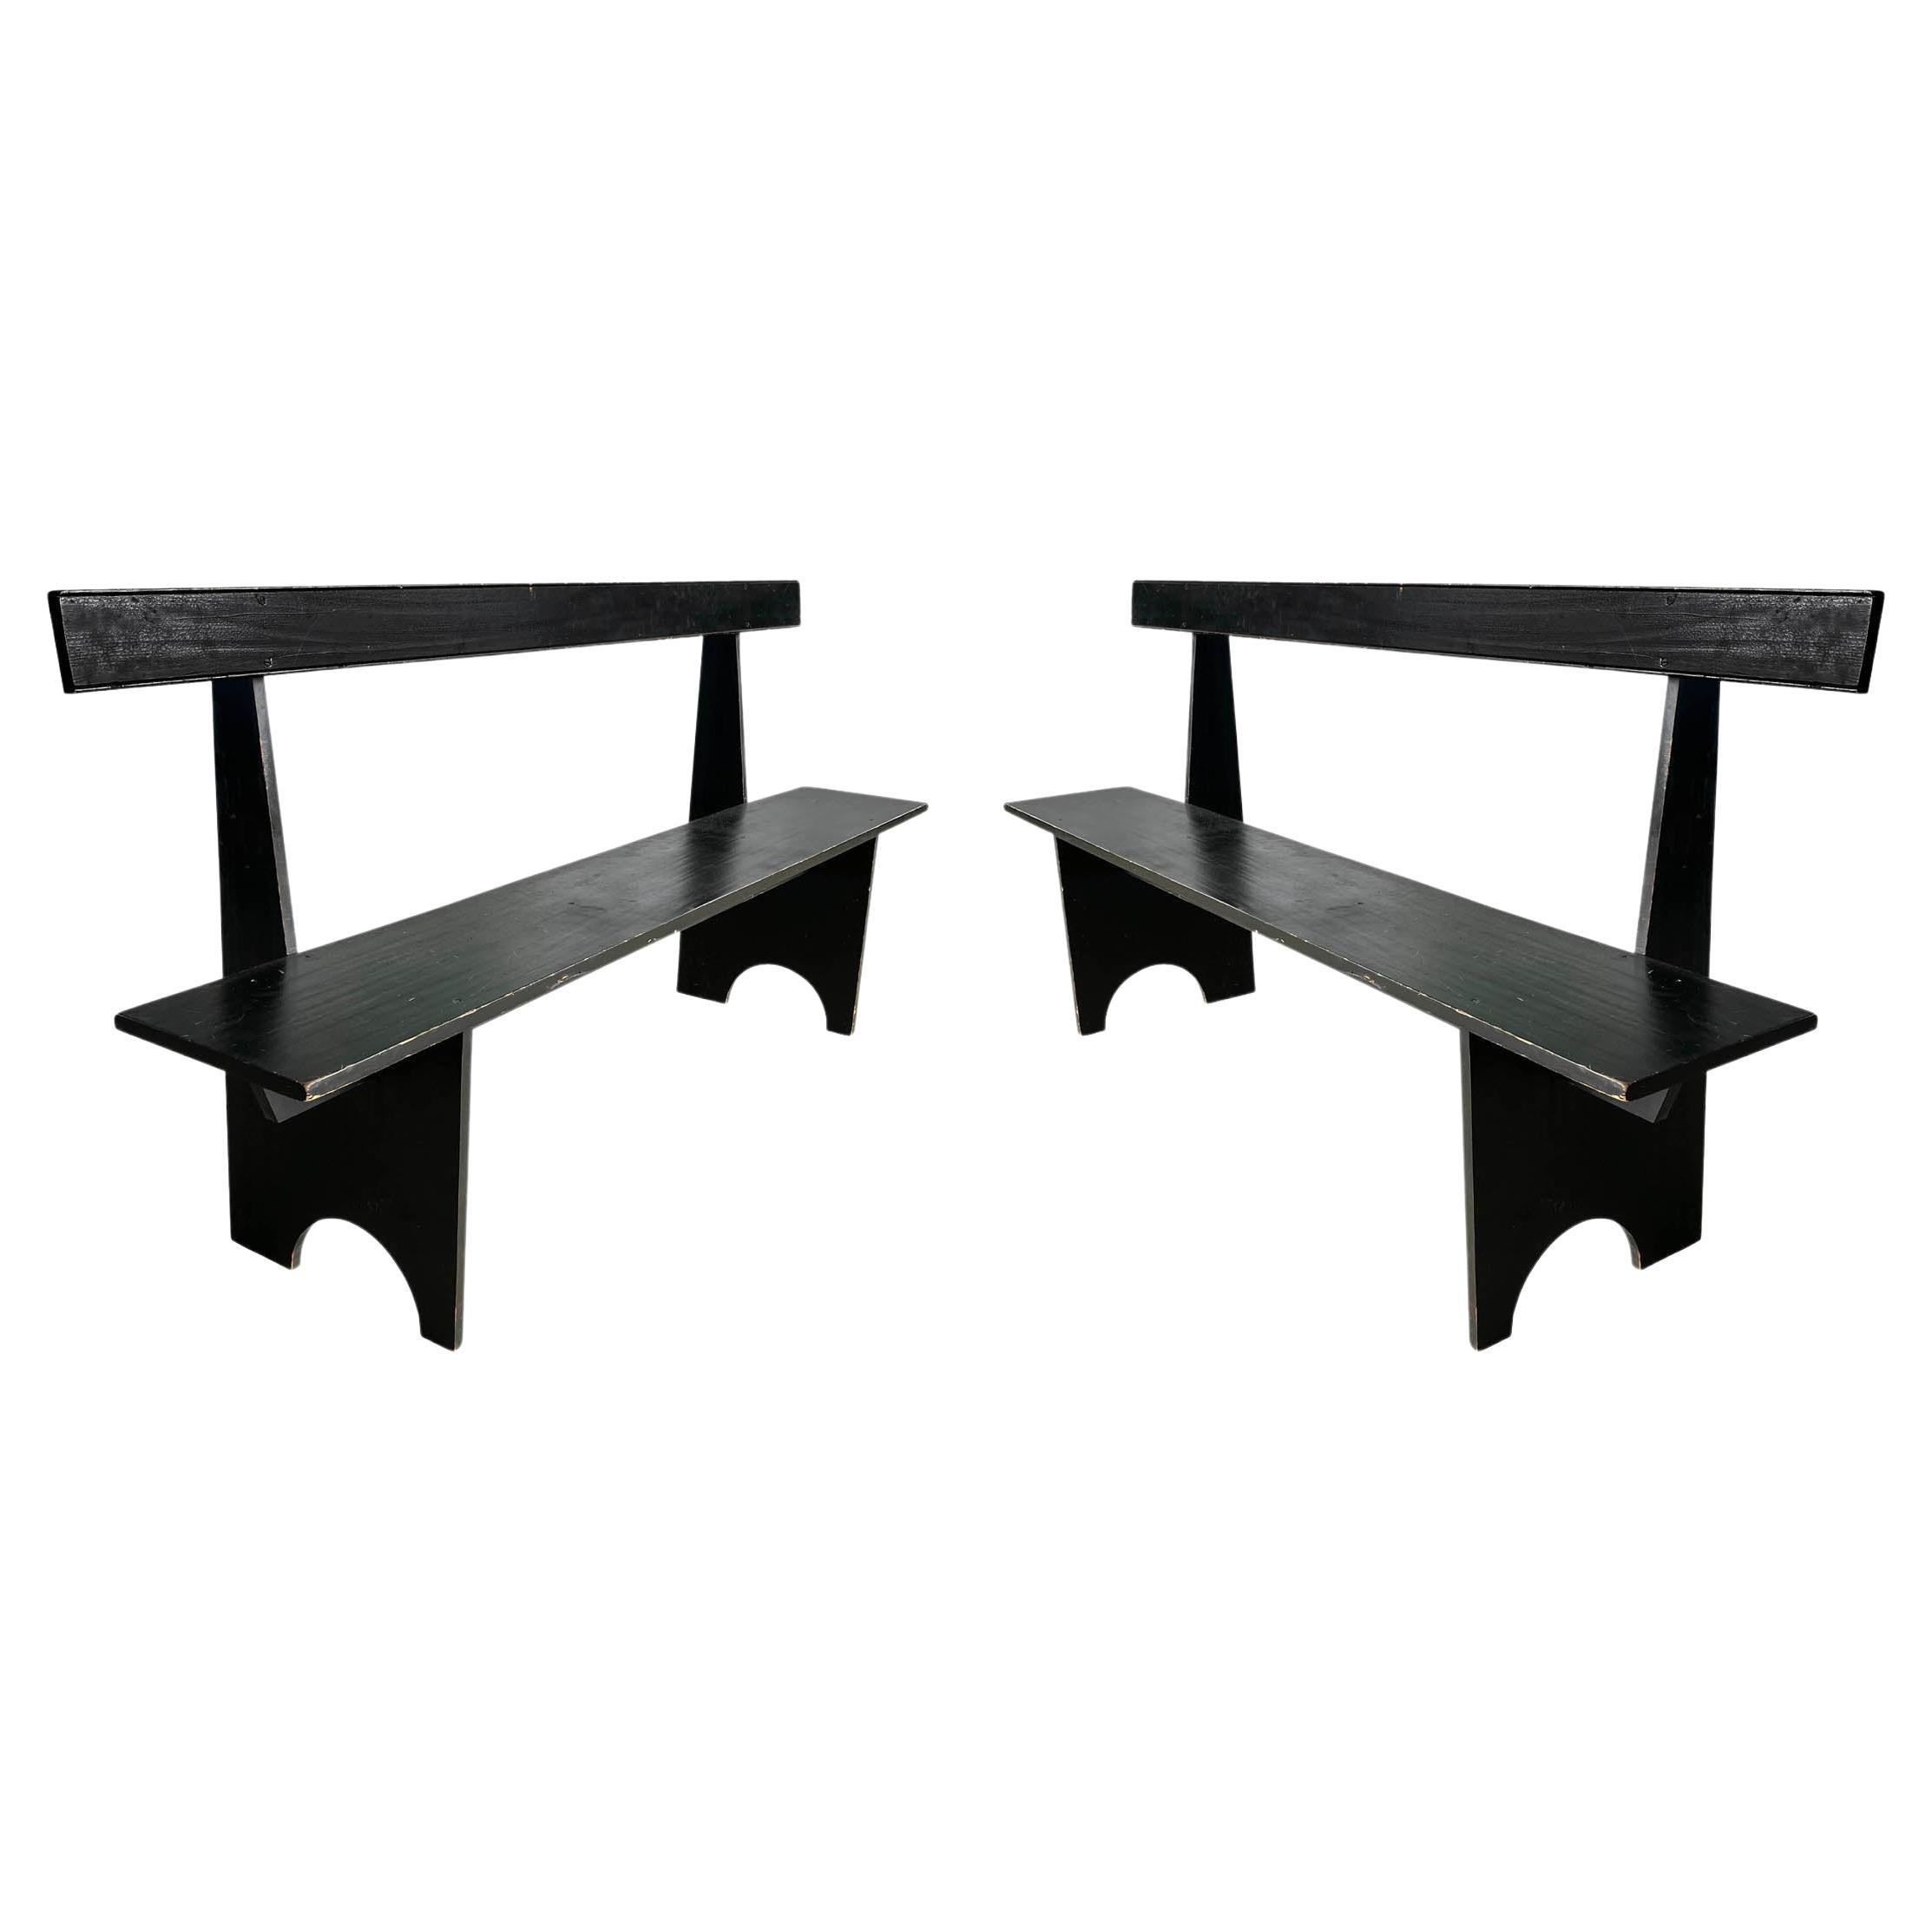 Pair of American Modernist Shaker-Inspired Benches For Sale